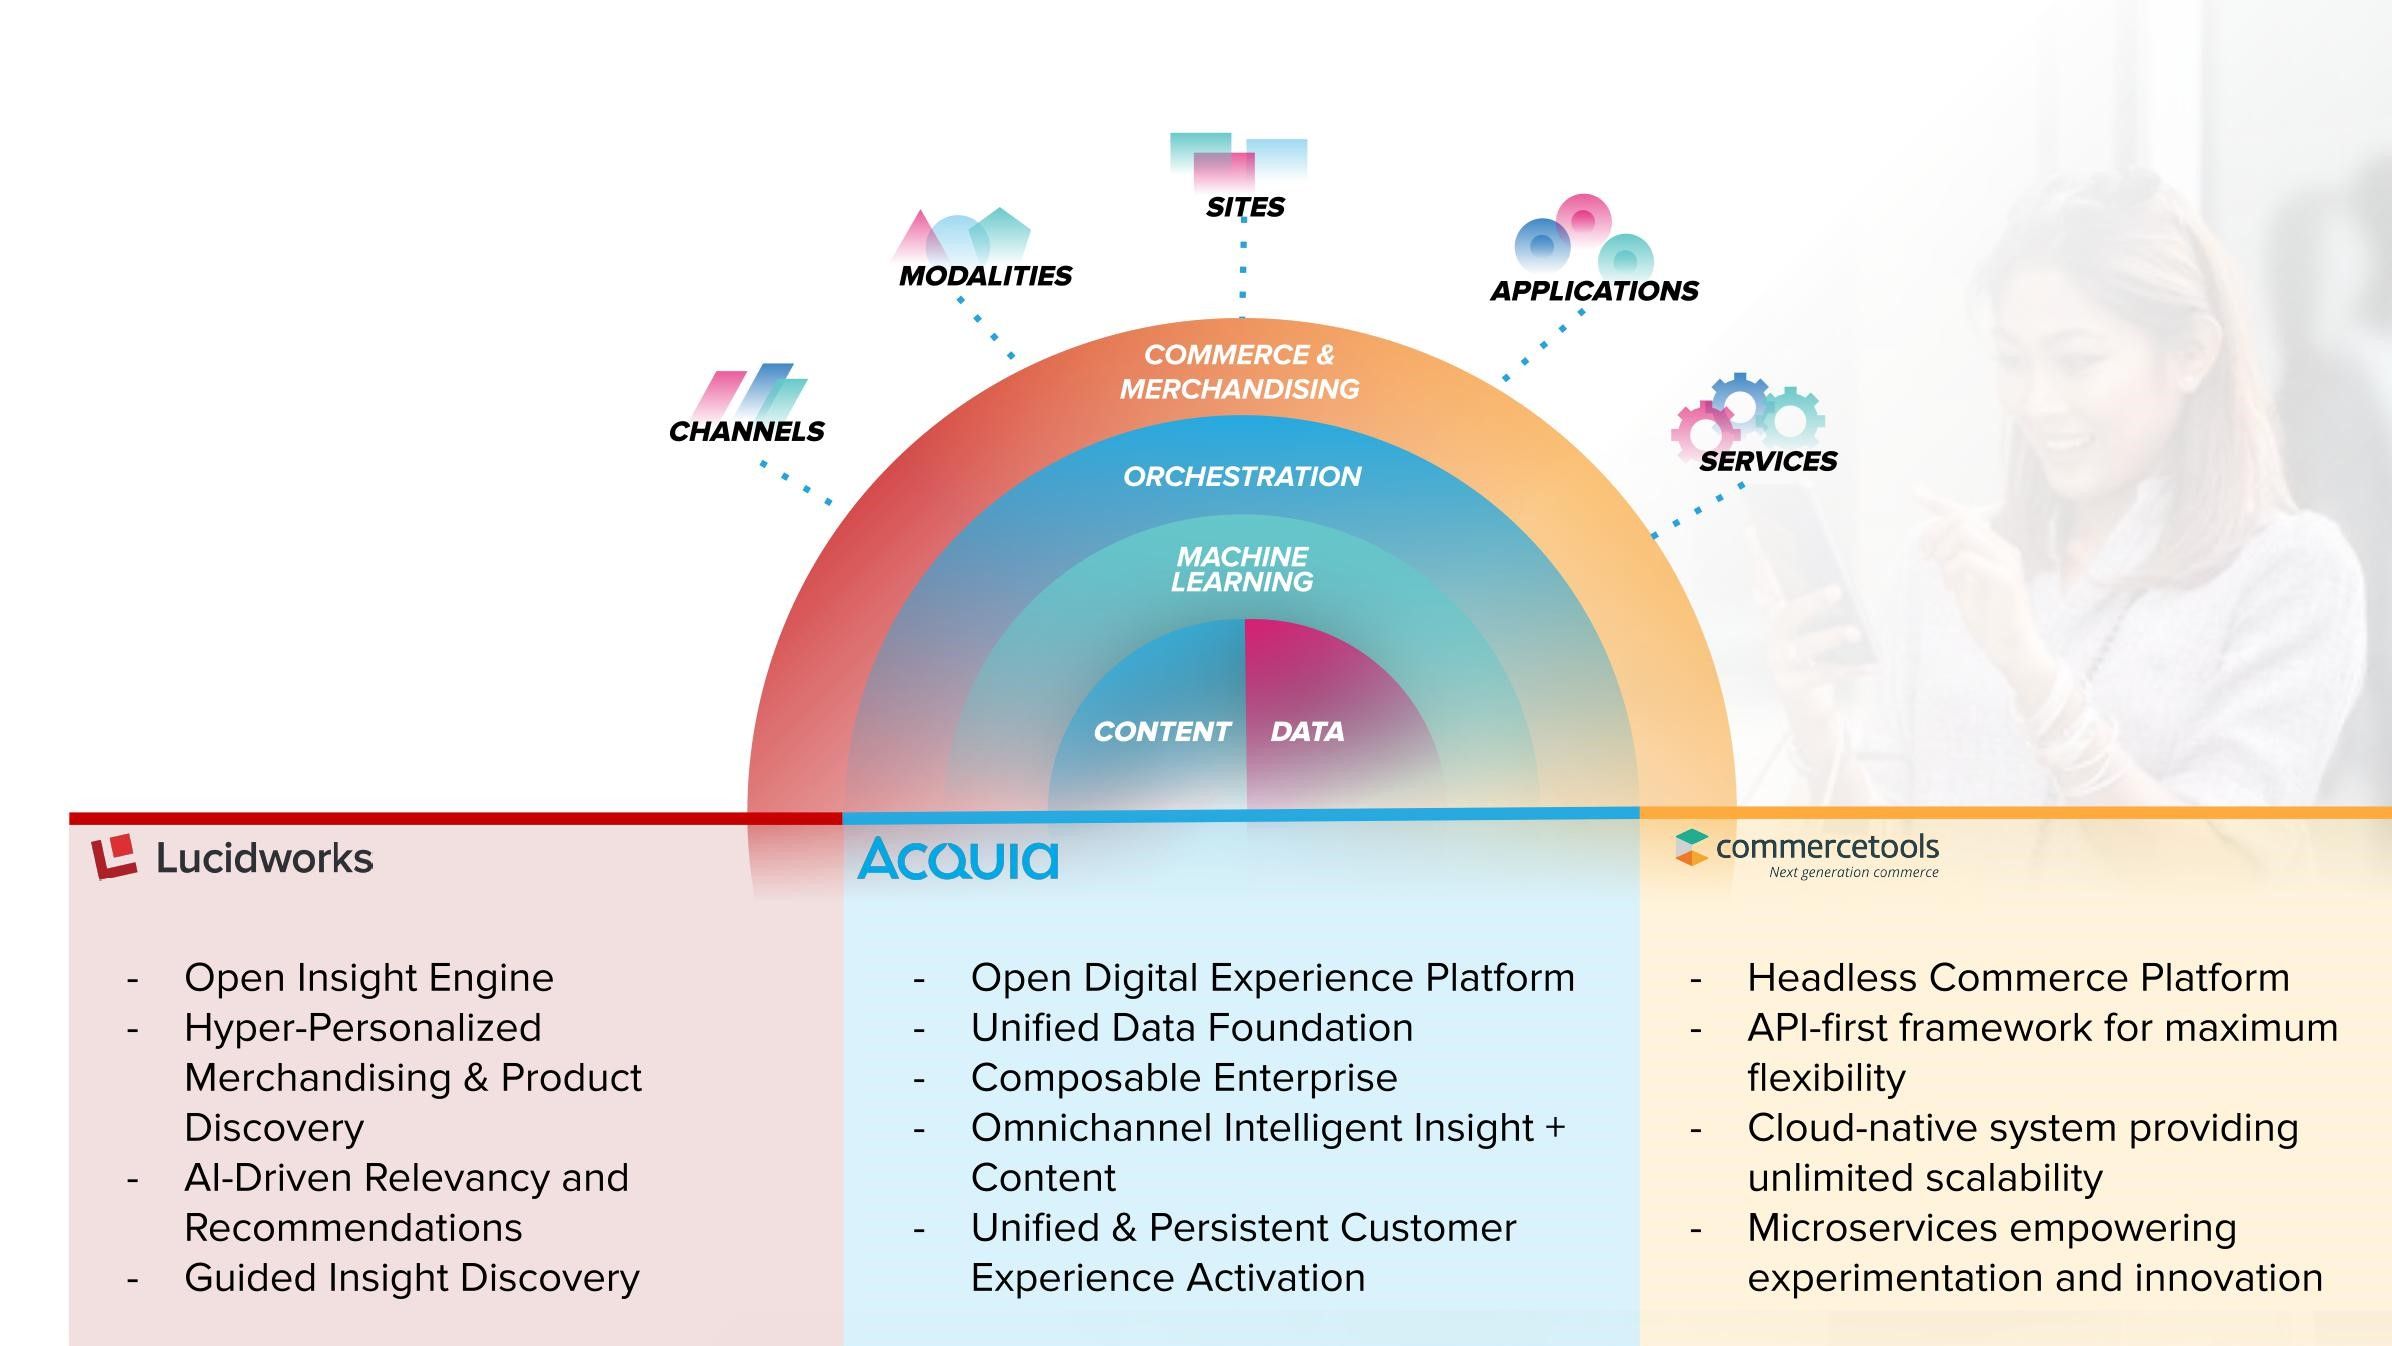 Image of Acquia features